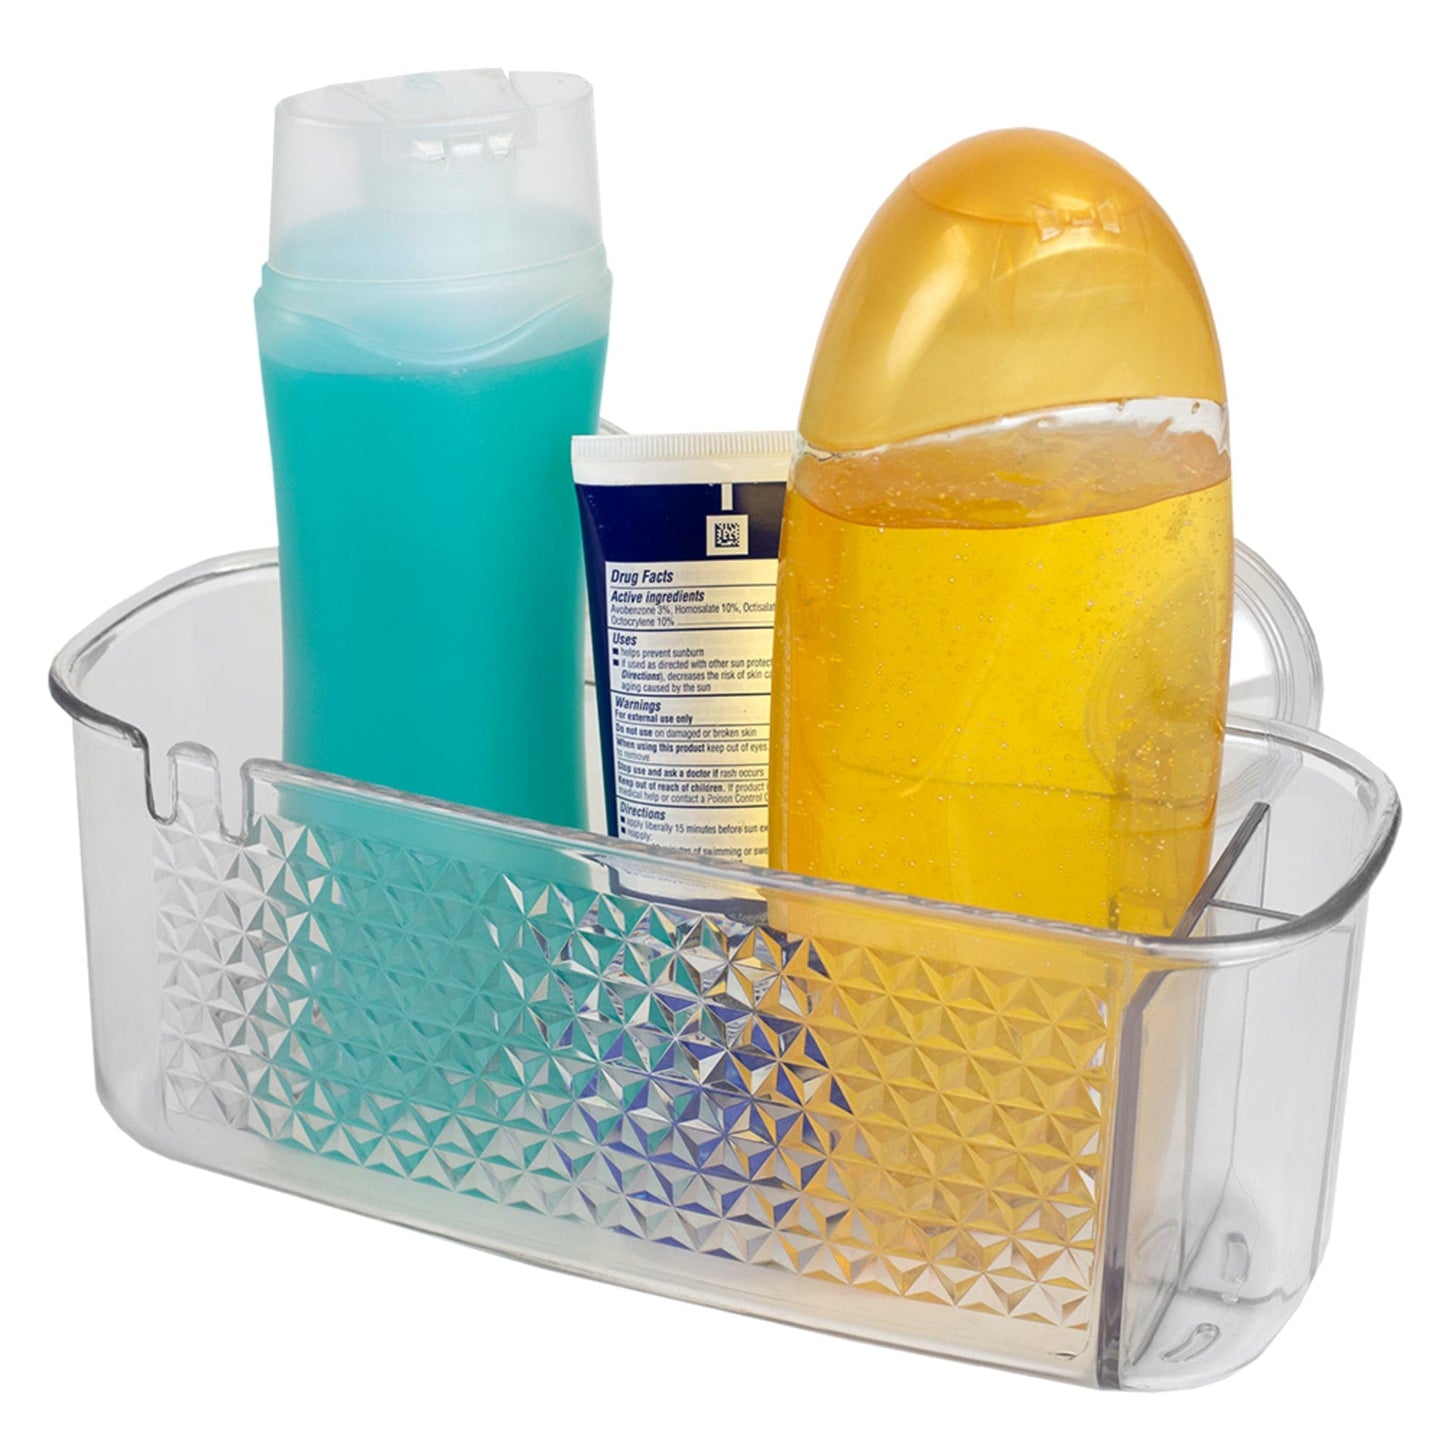 Large Cubic Patterned Plastic Corner Shower Caddy with Suction Cups, Clear, SHOWER, SHOP HOME BASICS